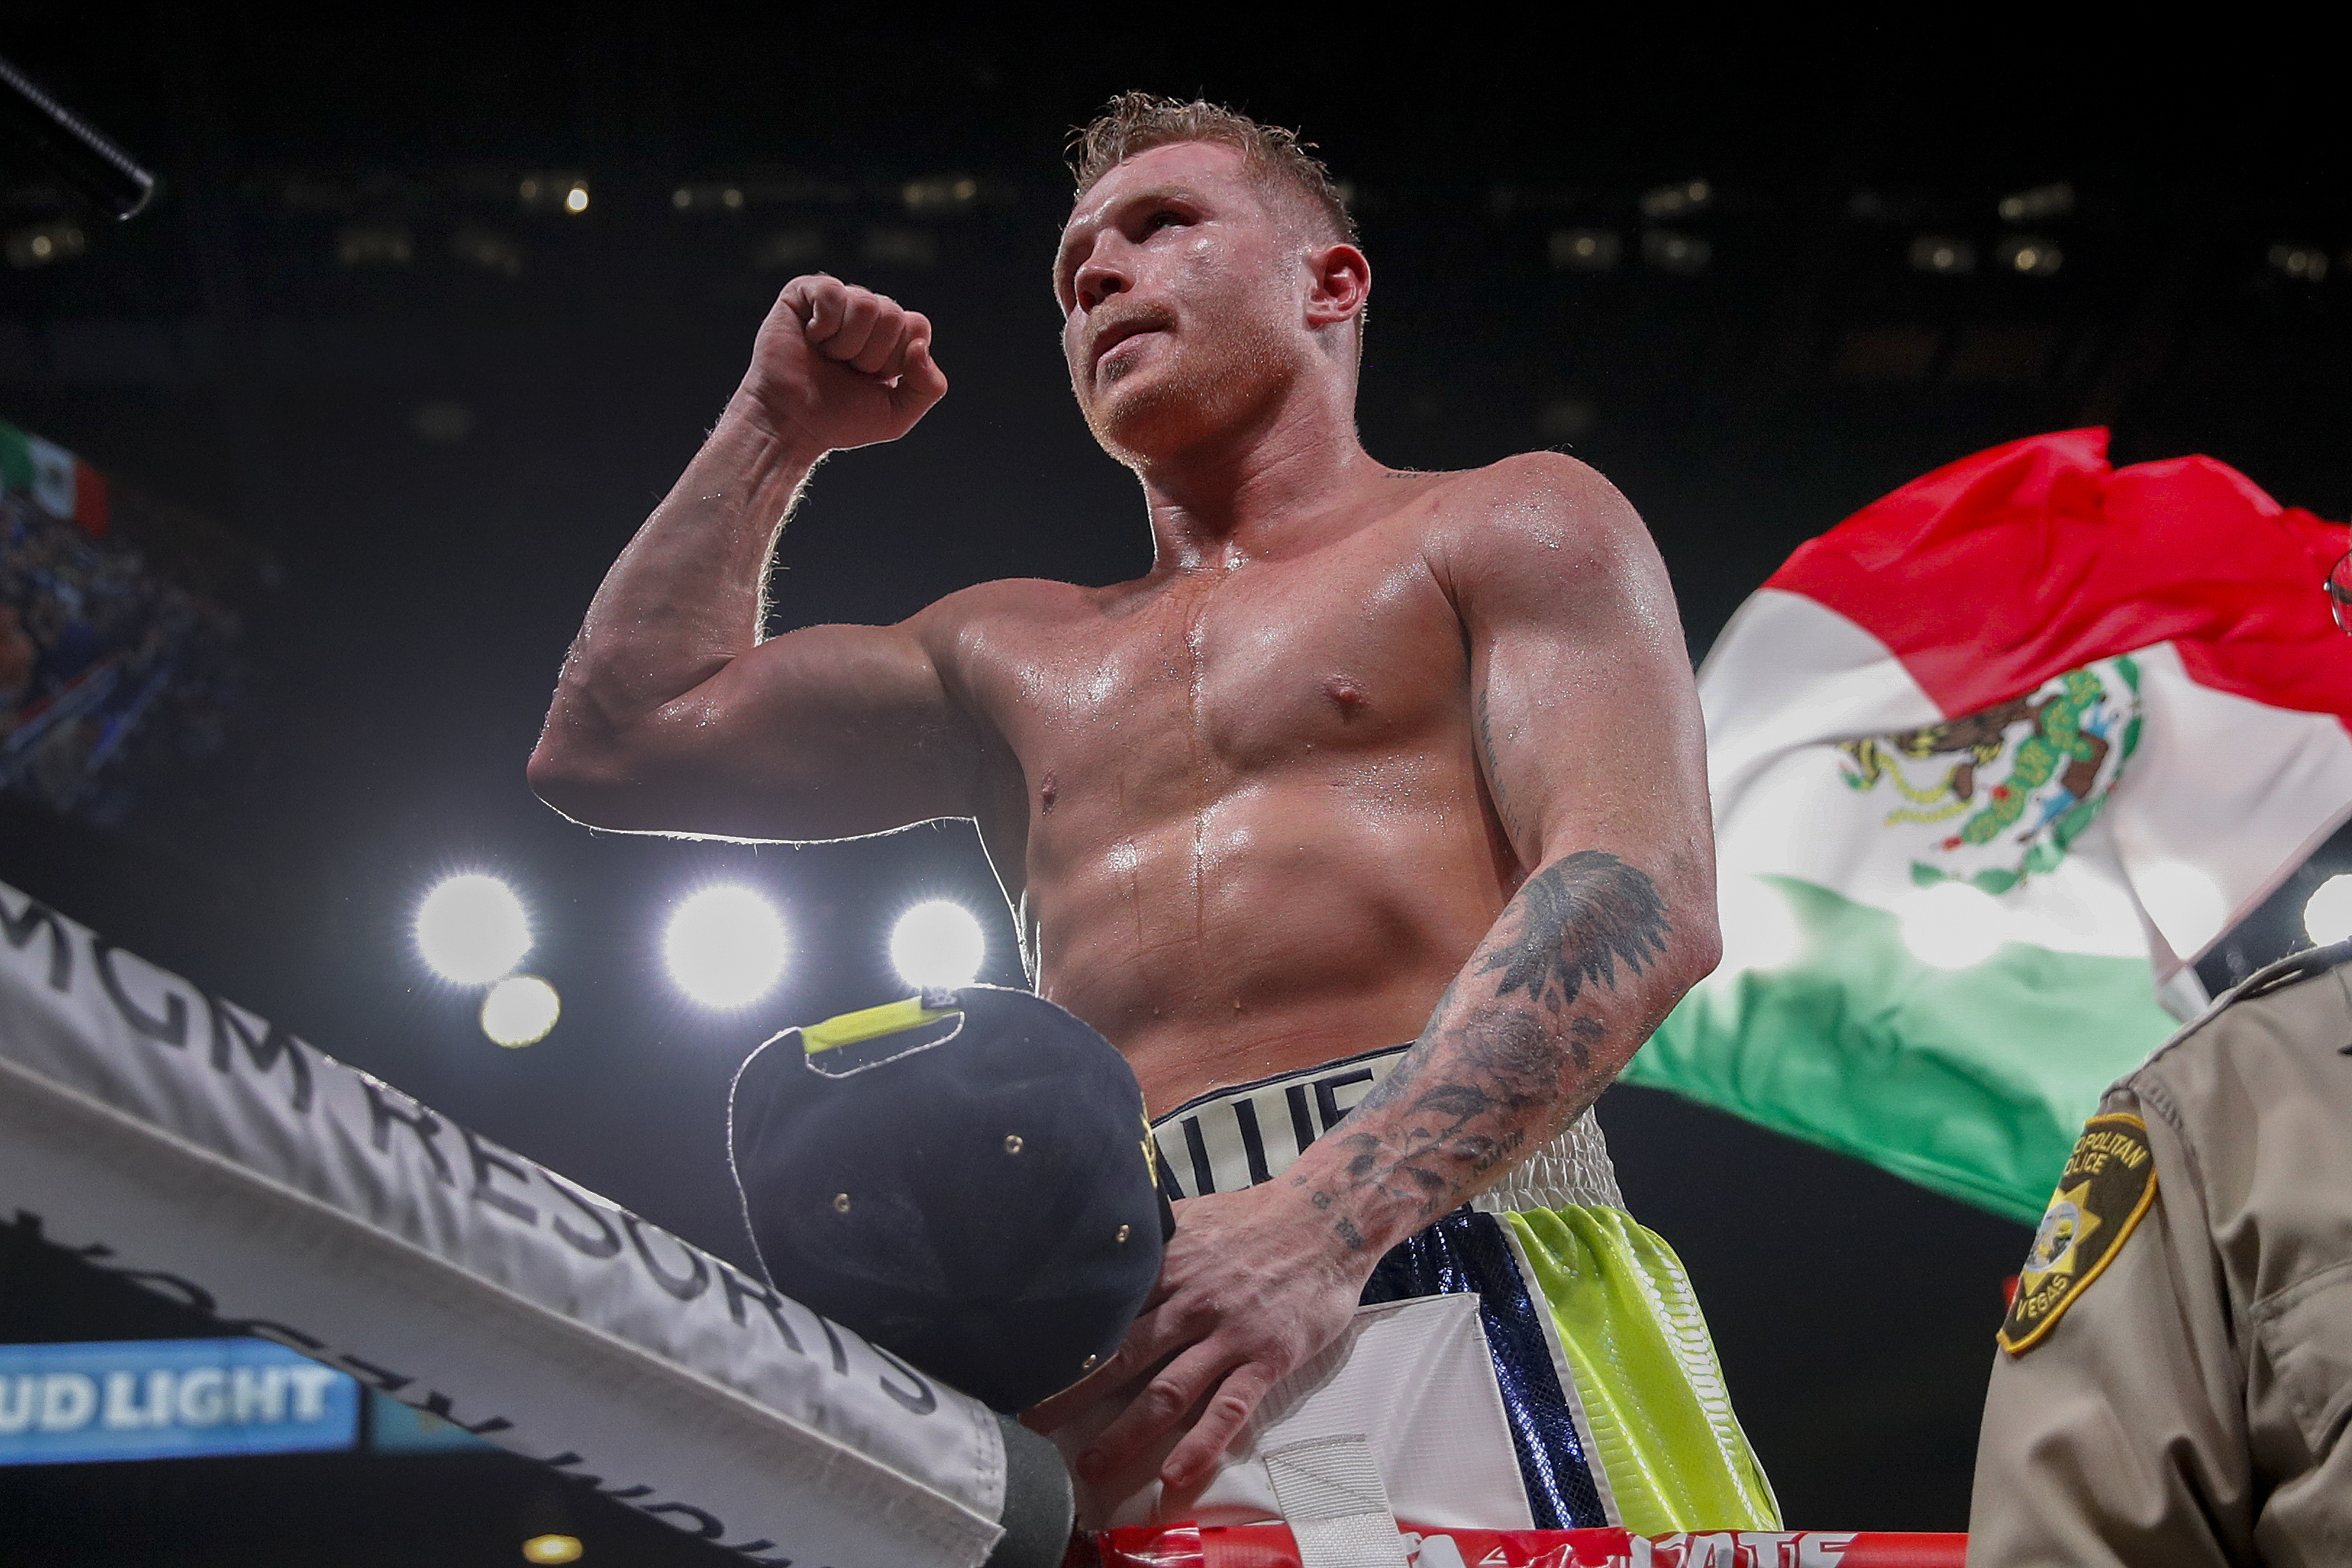 Canelo fight Live Stream How to watch online, time, TV channel, results